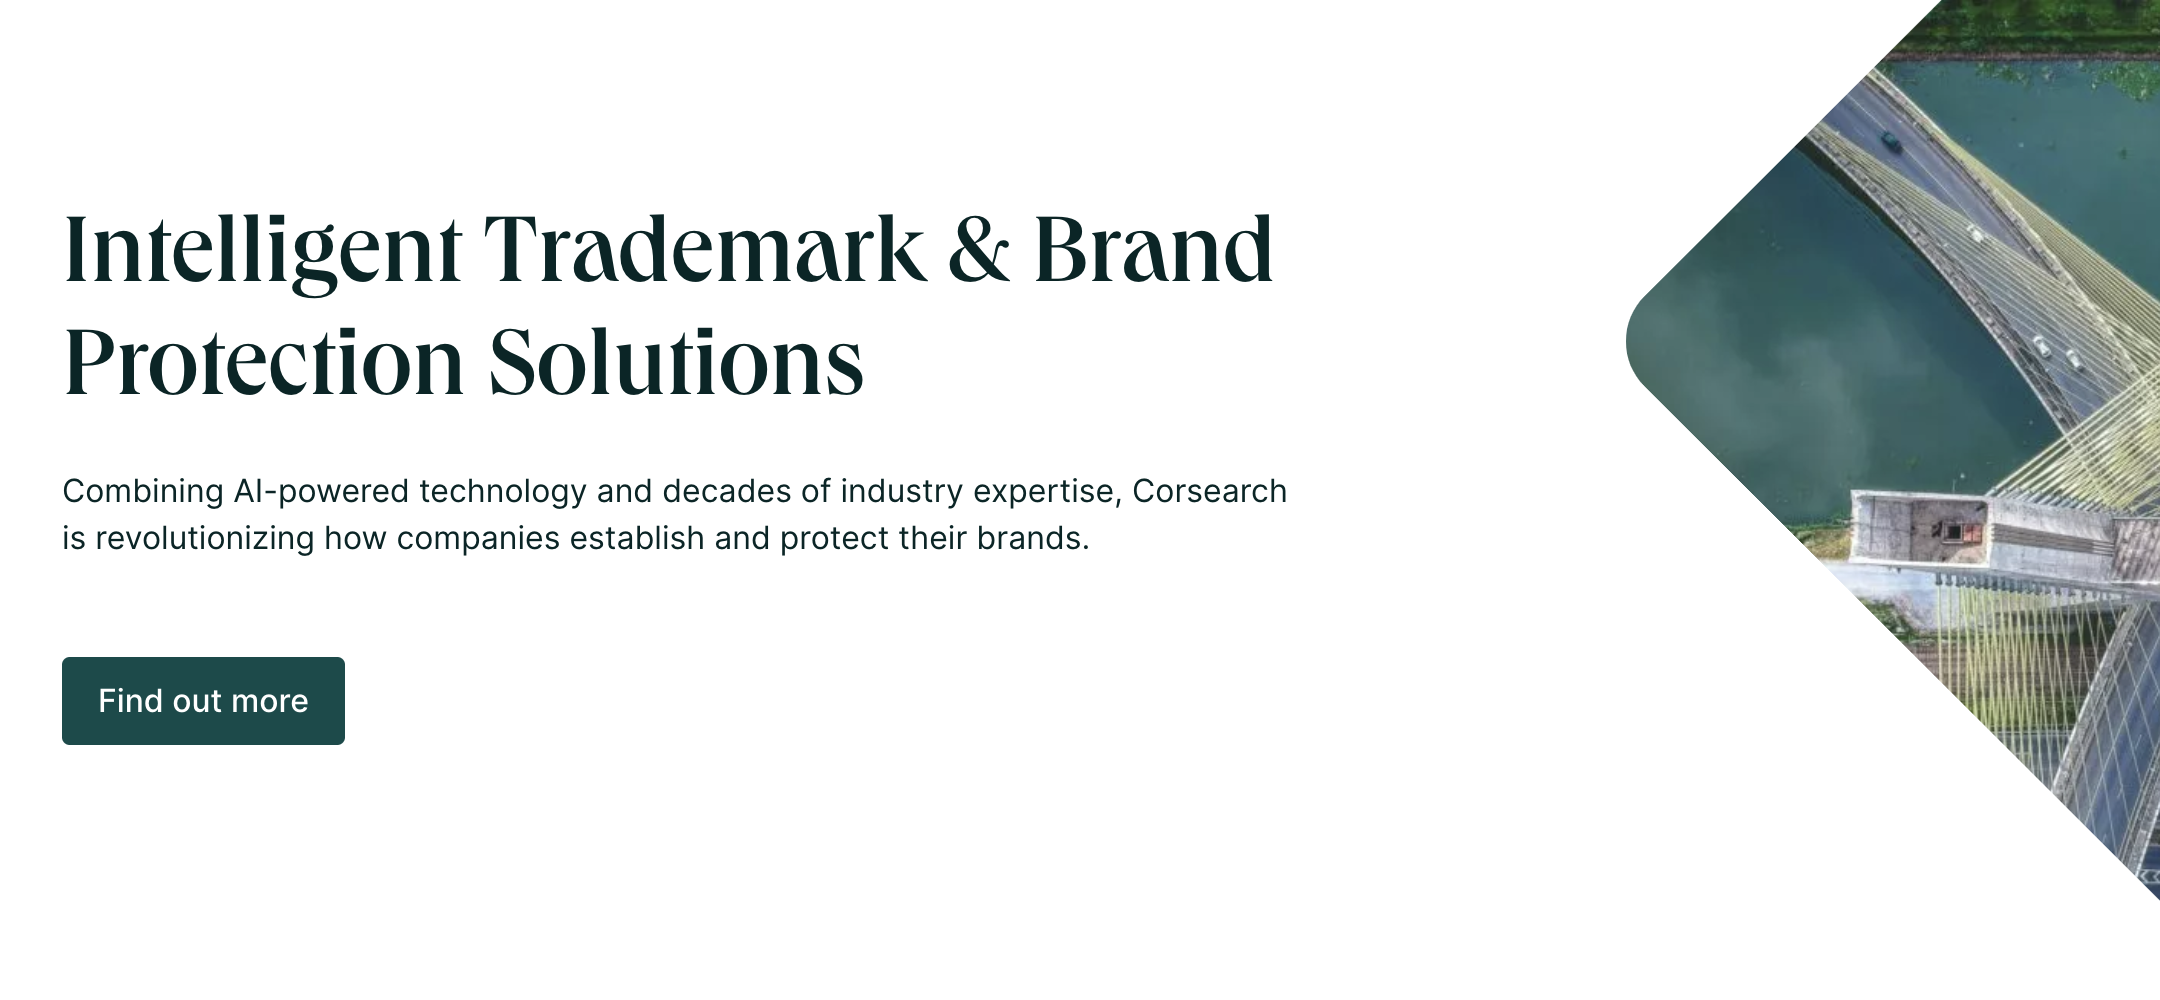 Corsearch-brand-protection-software